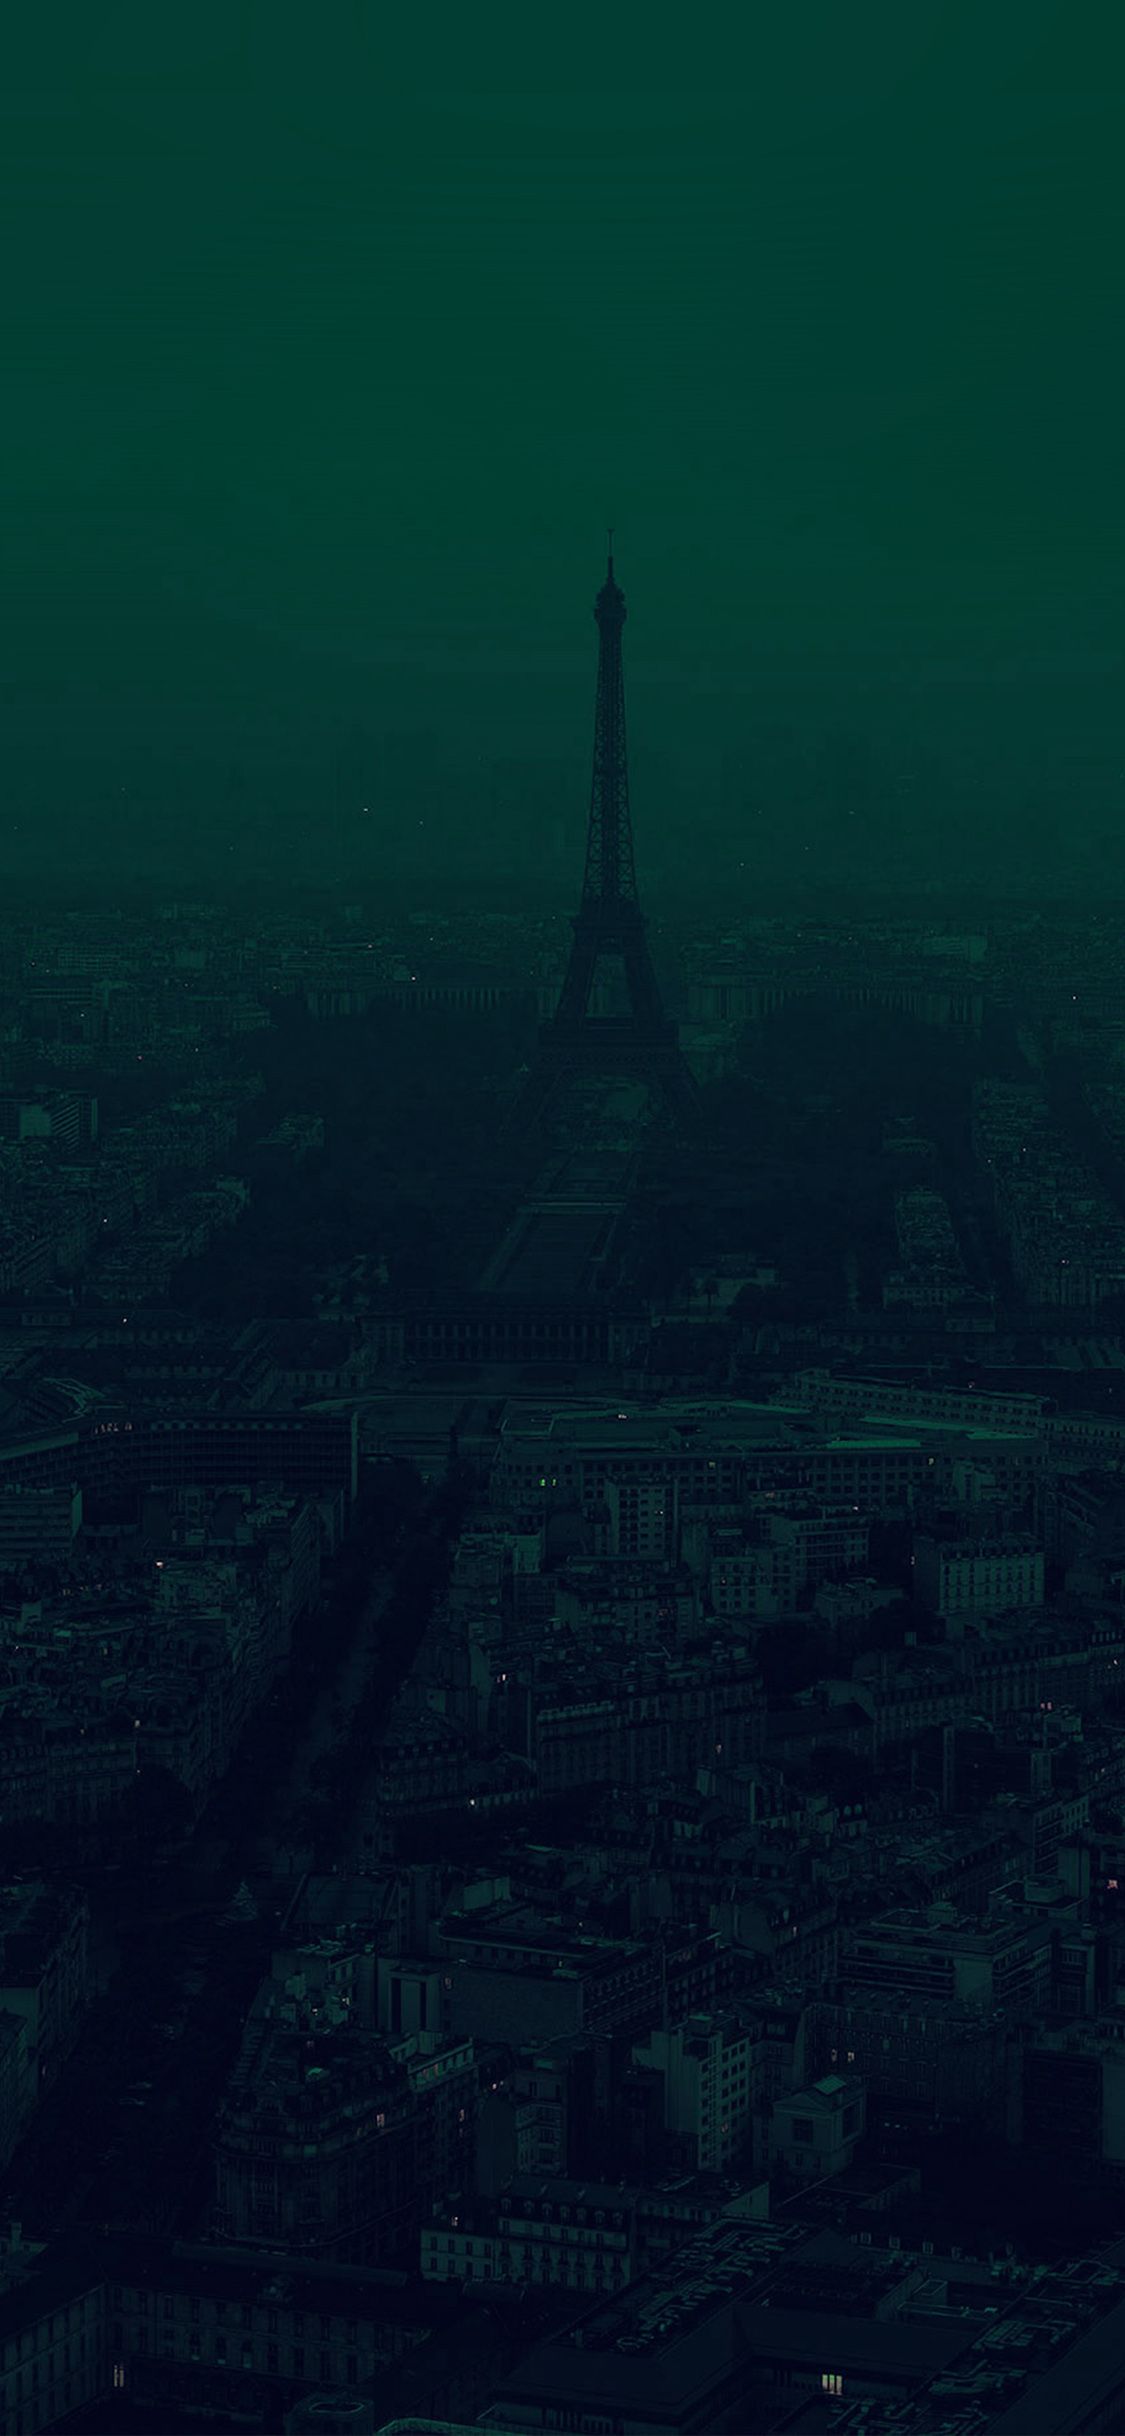 A city with the eiffel tower in it - Paris, dark green